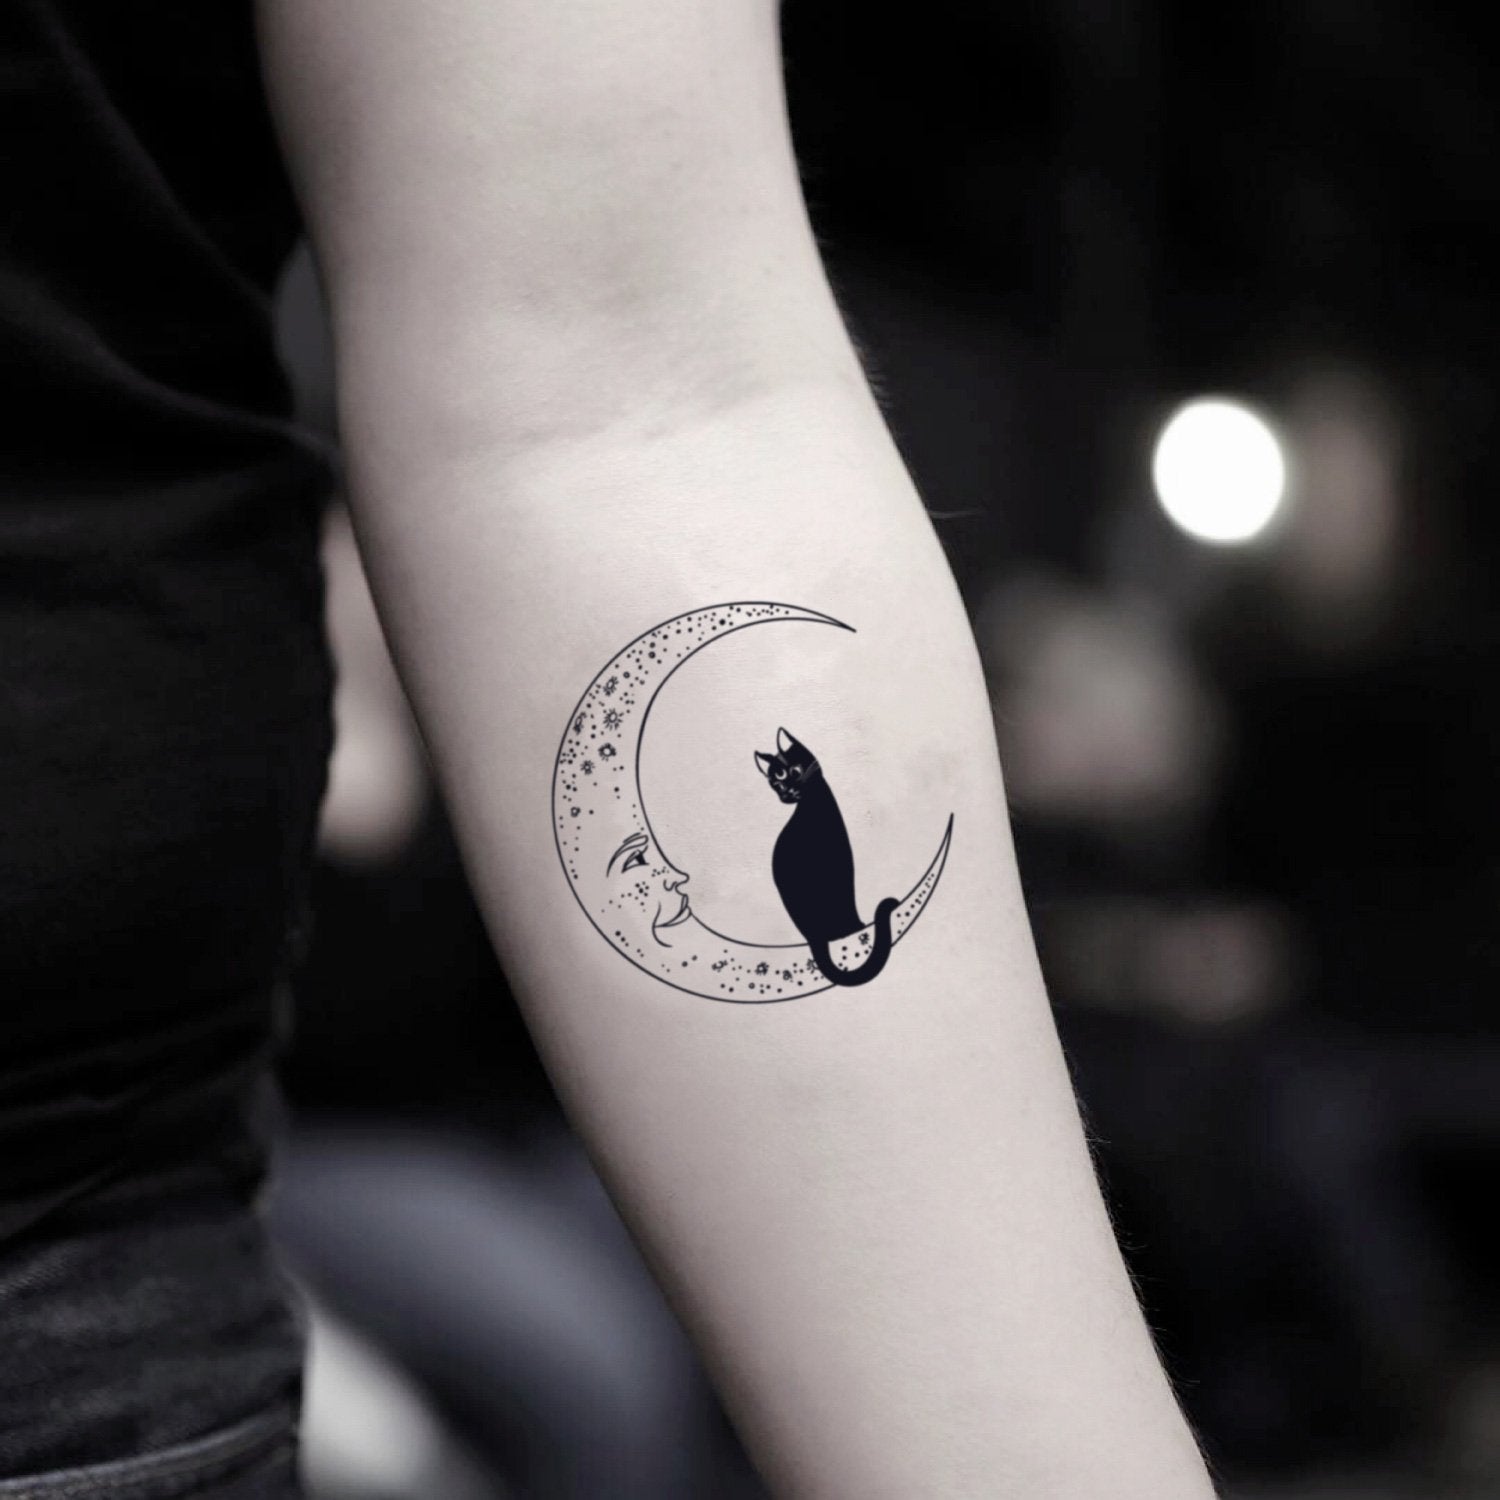 Hey guys So I recently got this tattoo of a black cat and a moon bc Ive  always been intrigued by them and as soon as I walked out of the tattoo